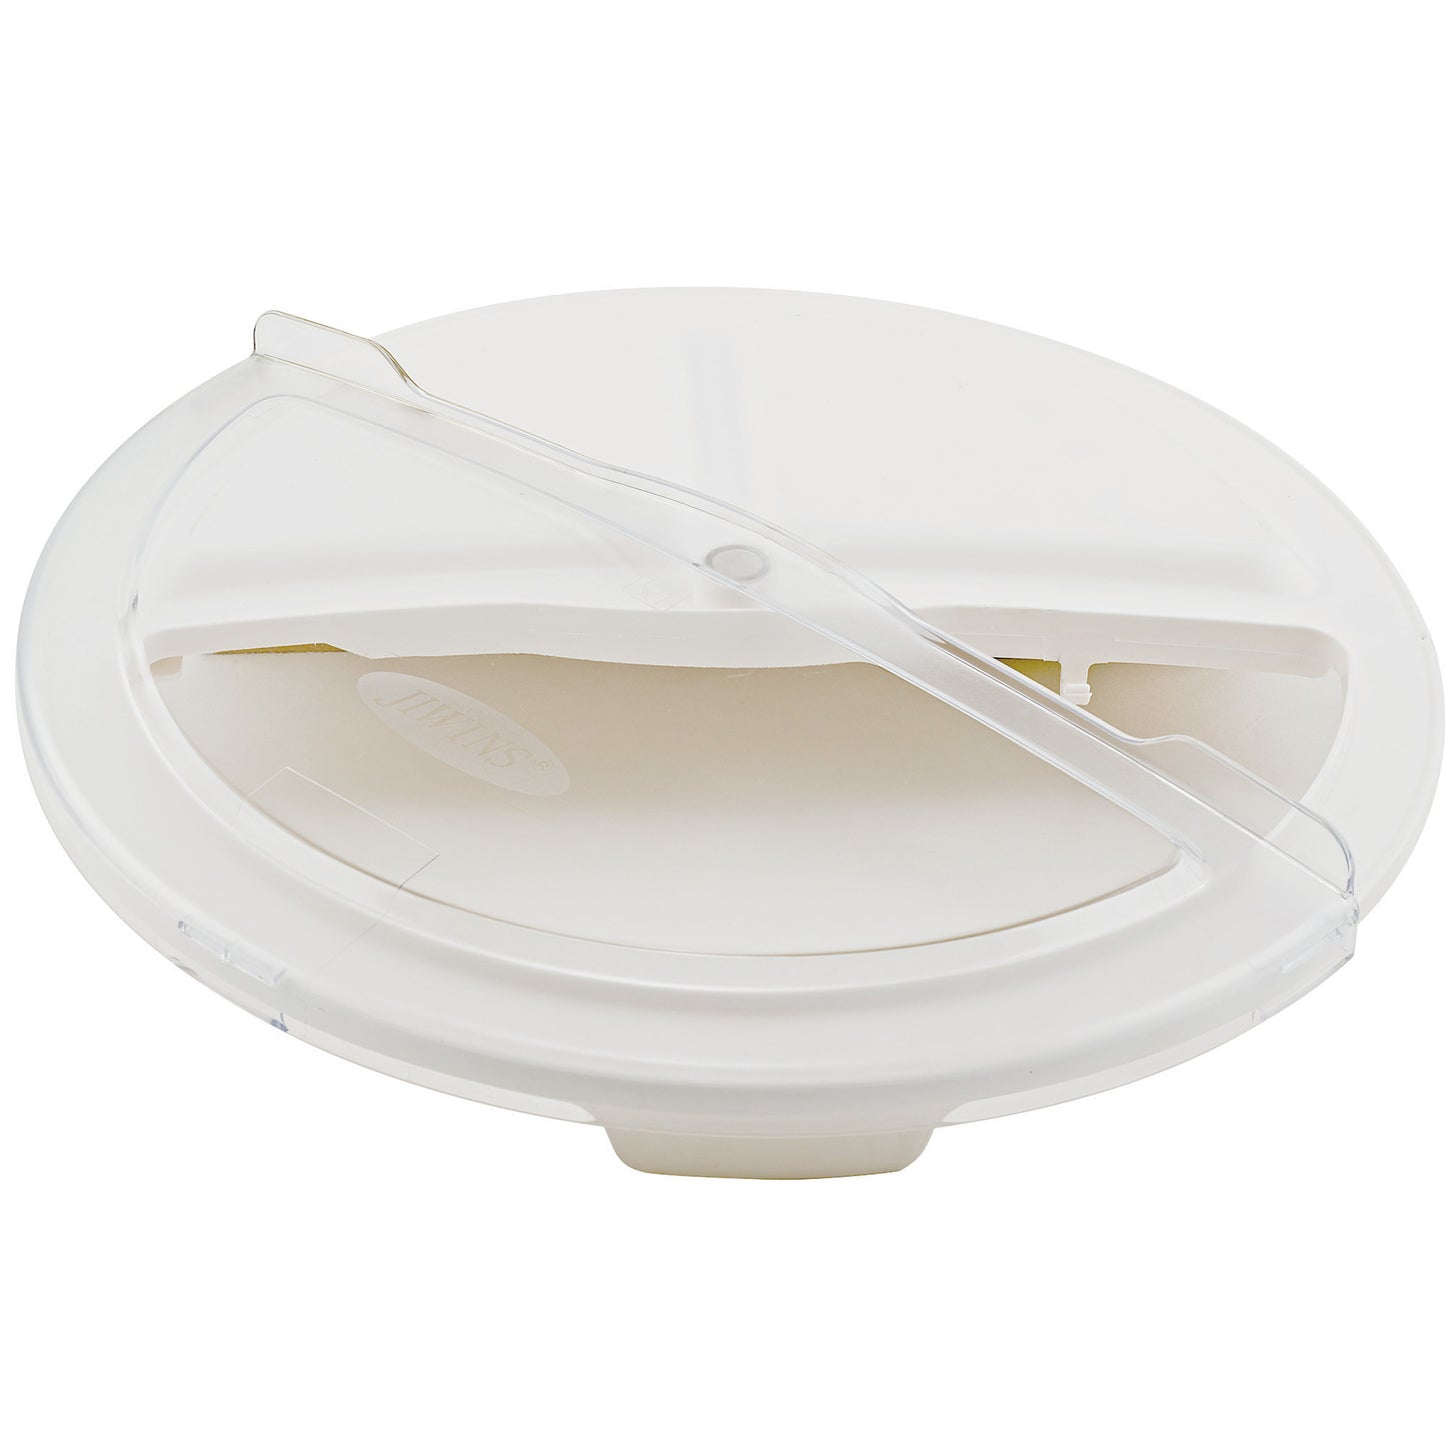 Polycarbonate Rotating Lids for White Containers - 10 Gallon